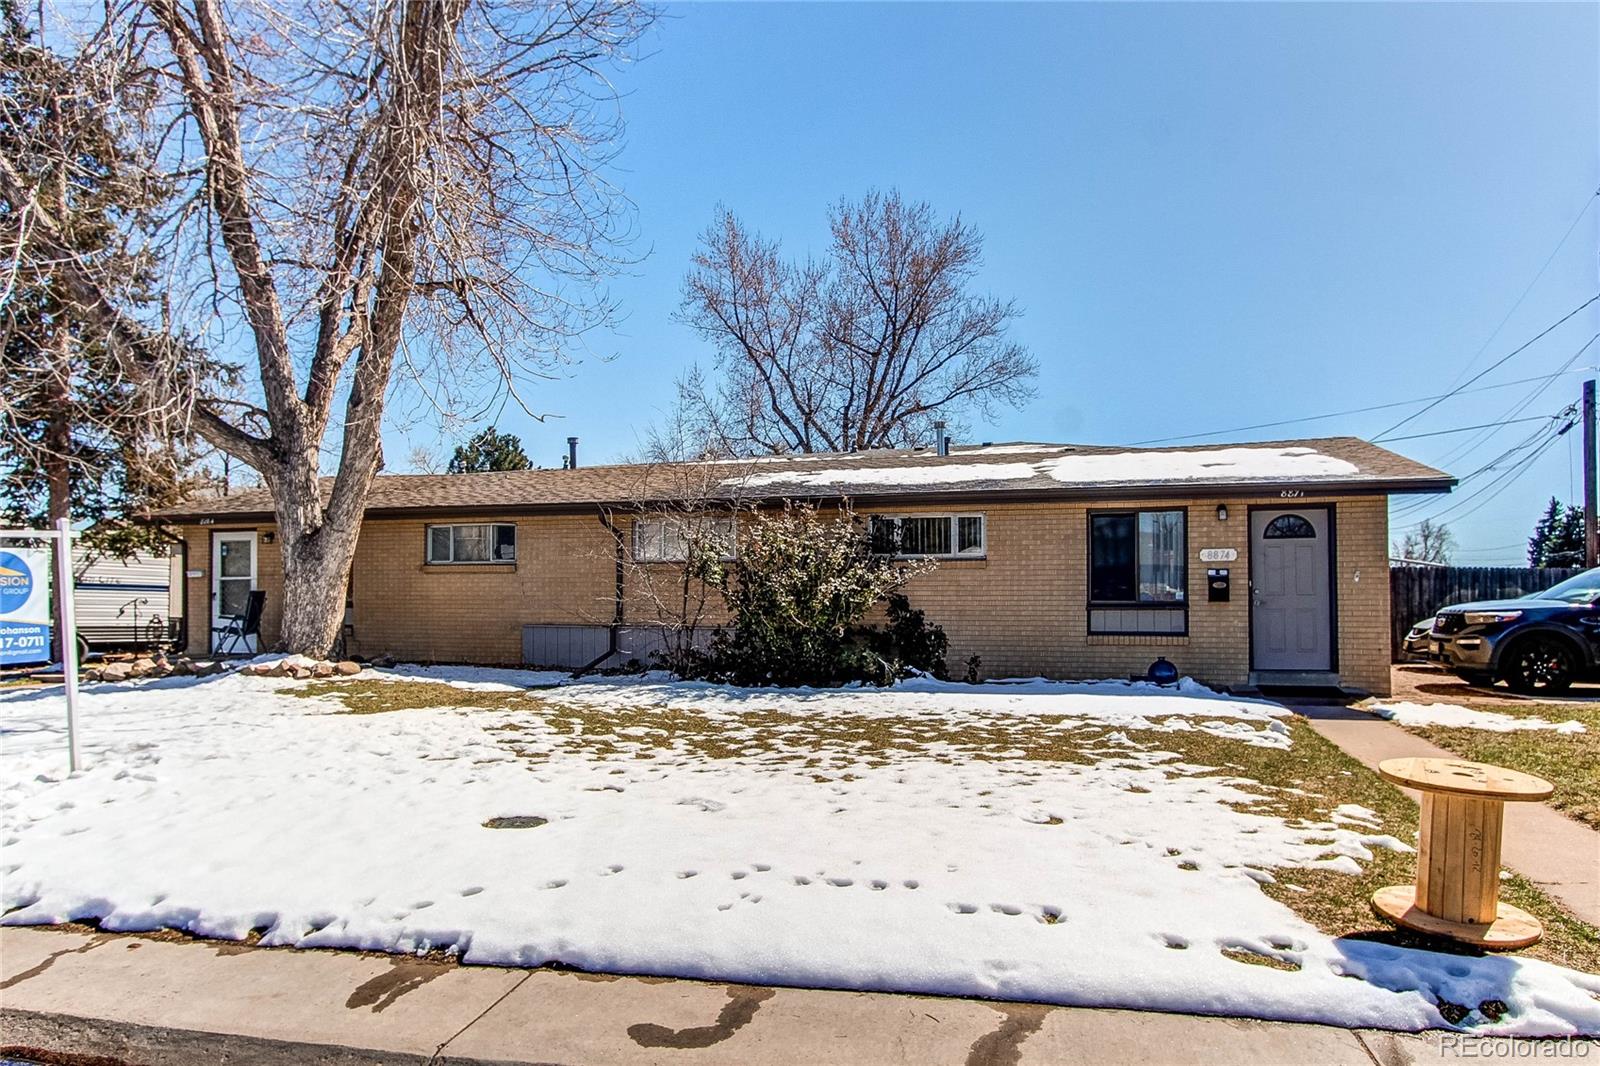 Report Image for 8864-8874 W 54th Place,Arvada, Colorado